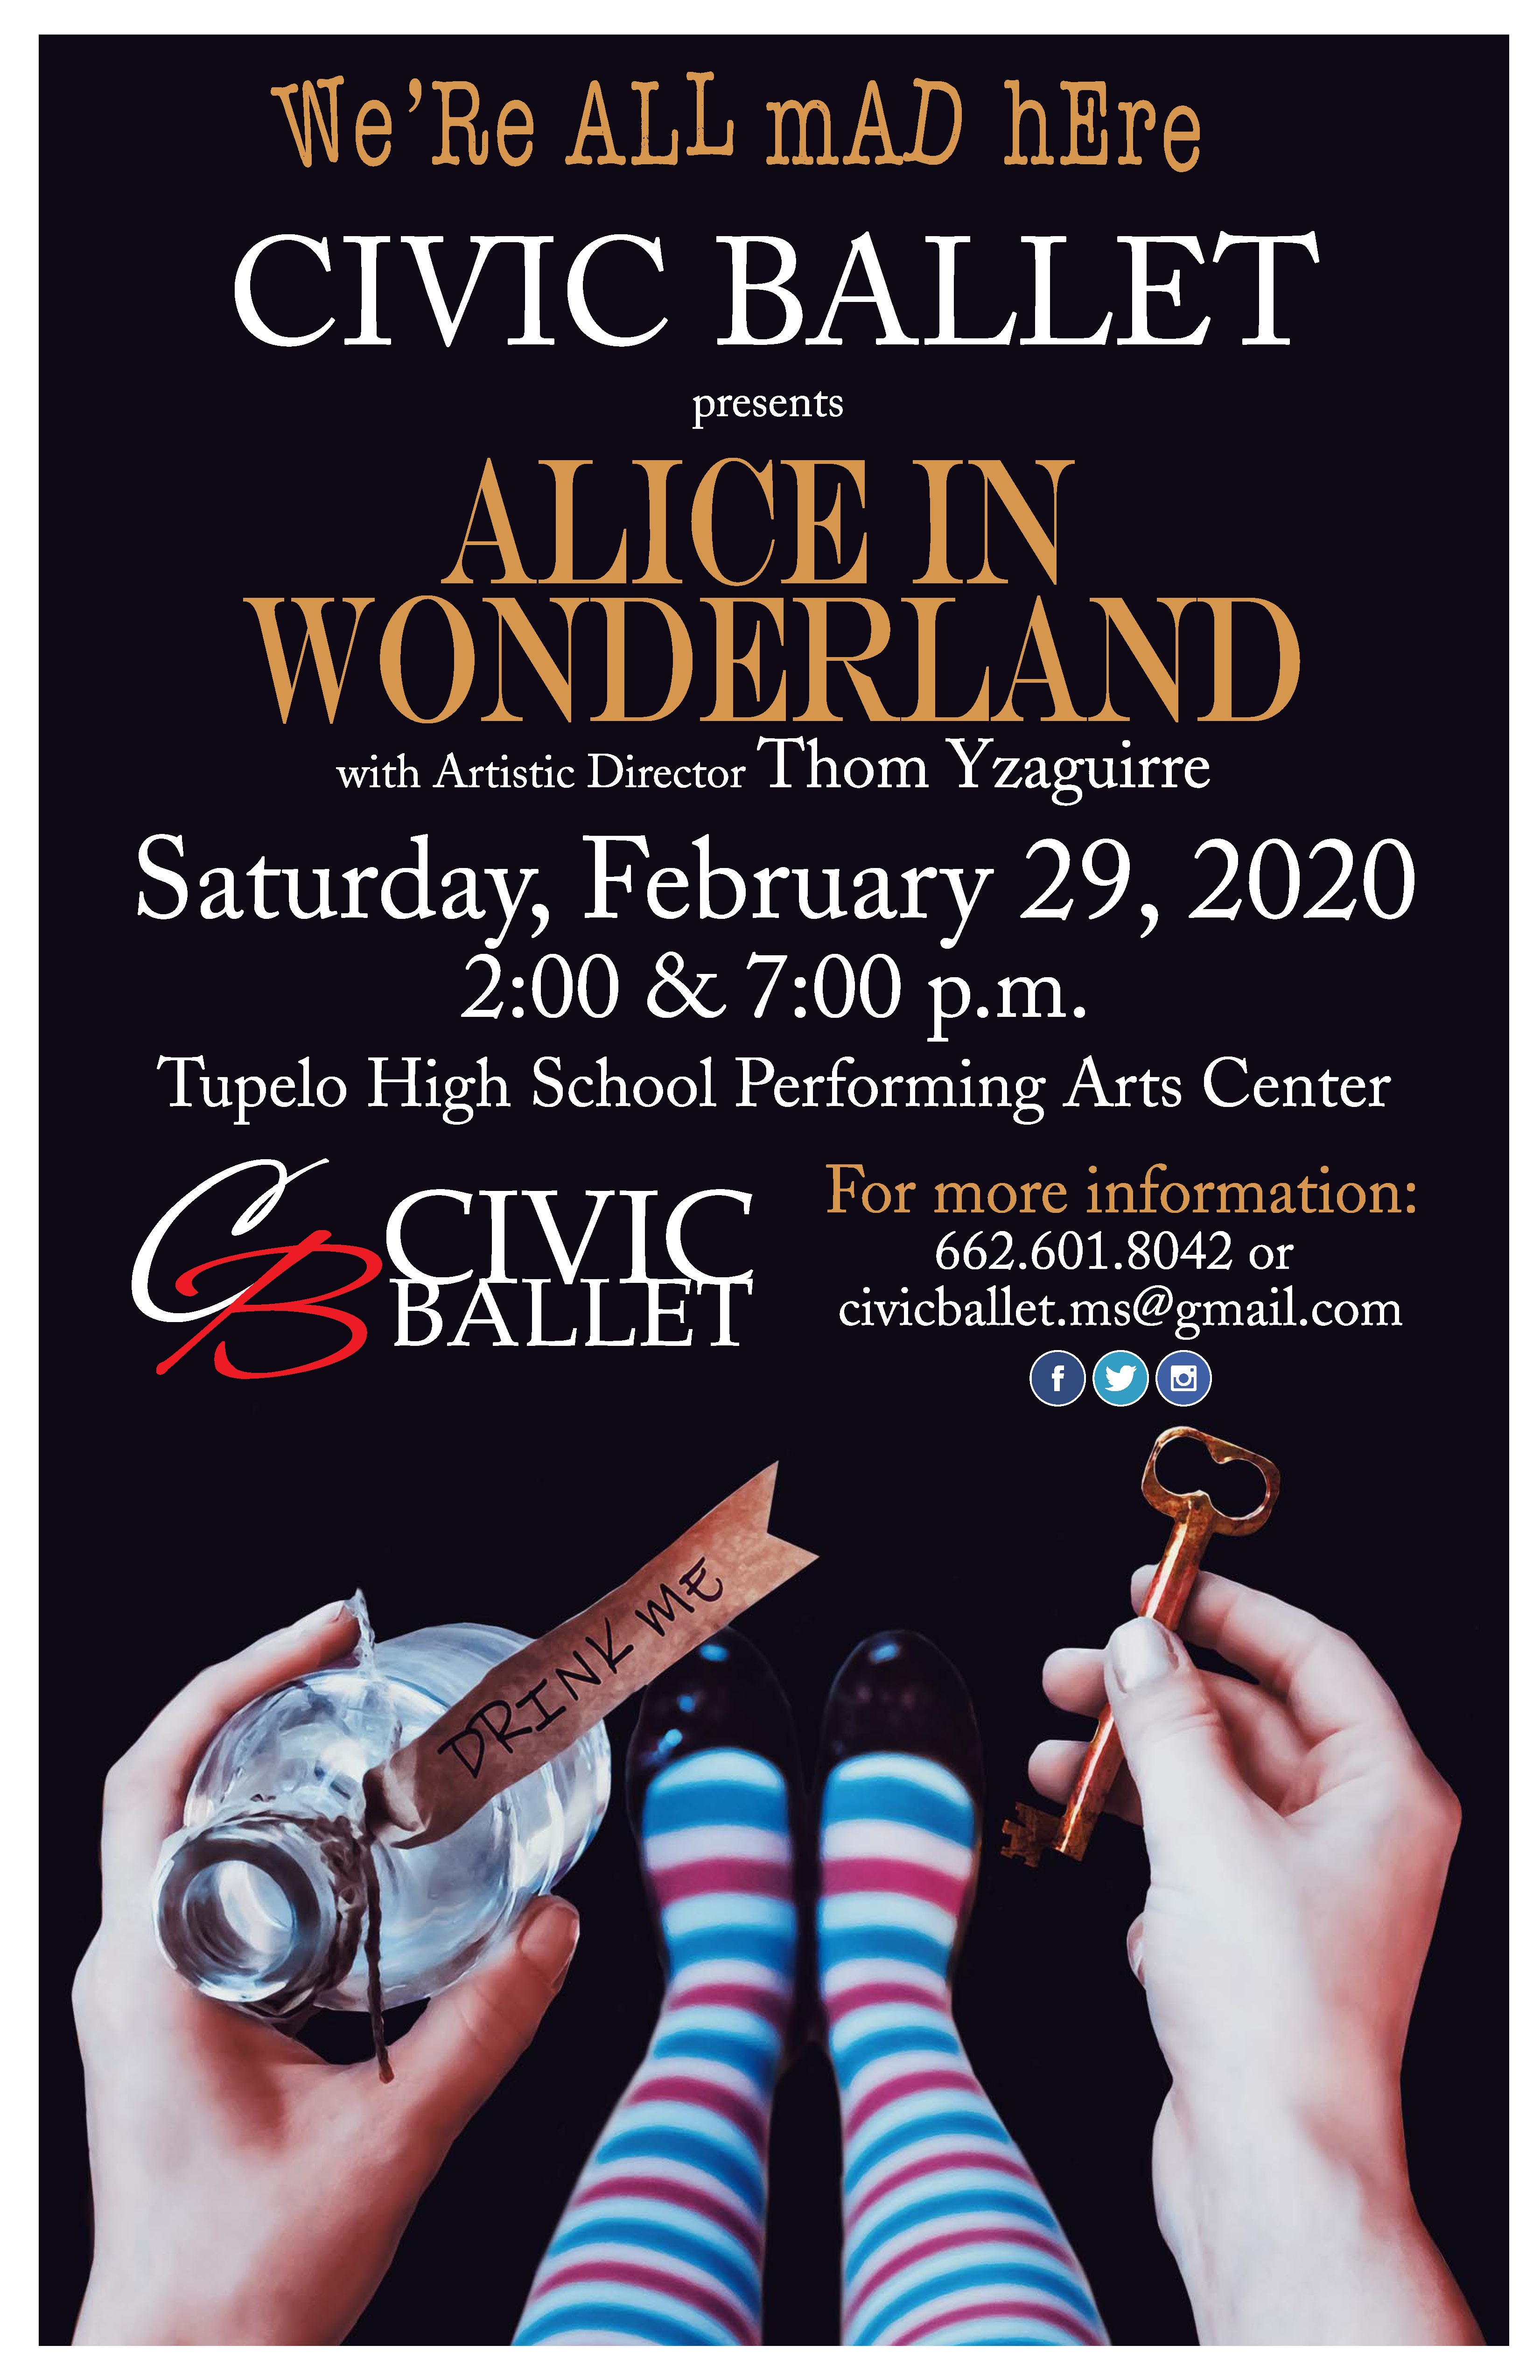 Alice in Wonderland - Save the Date